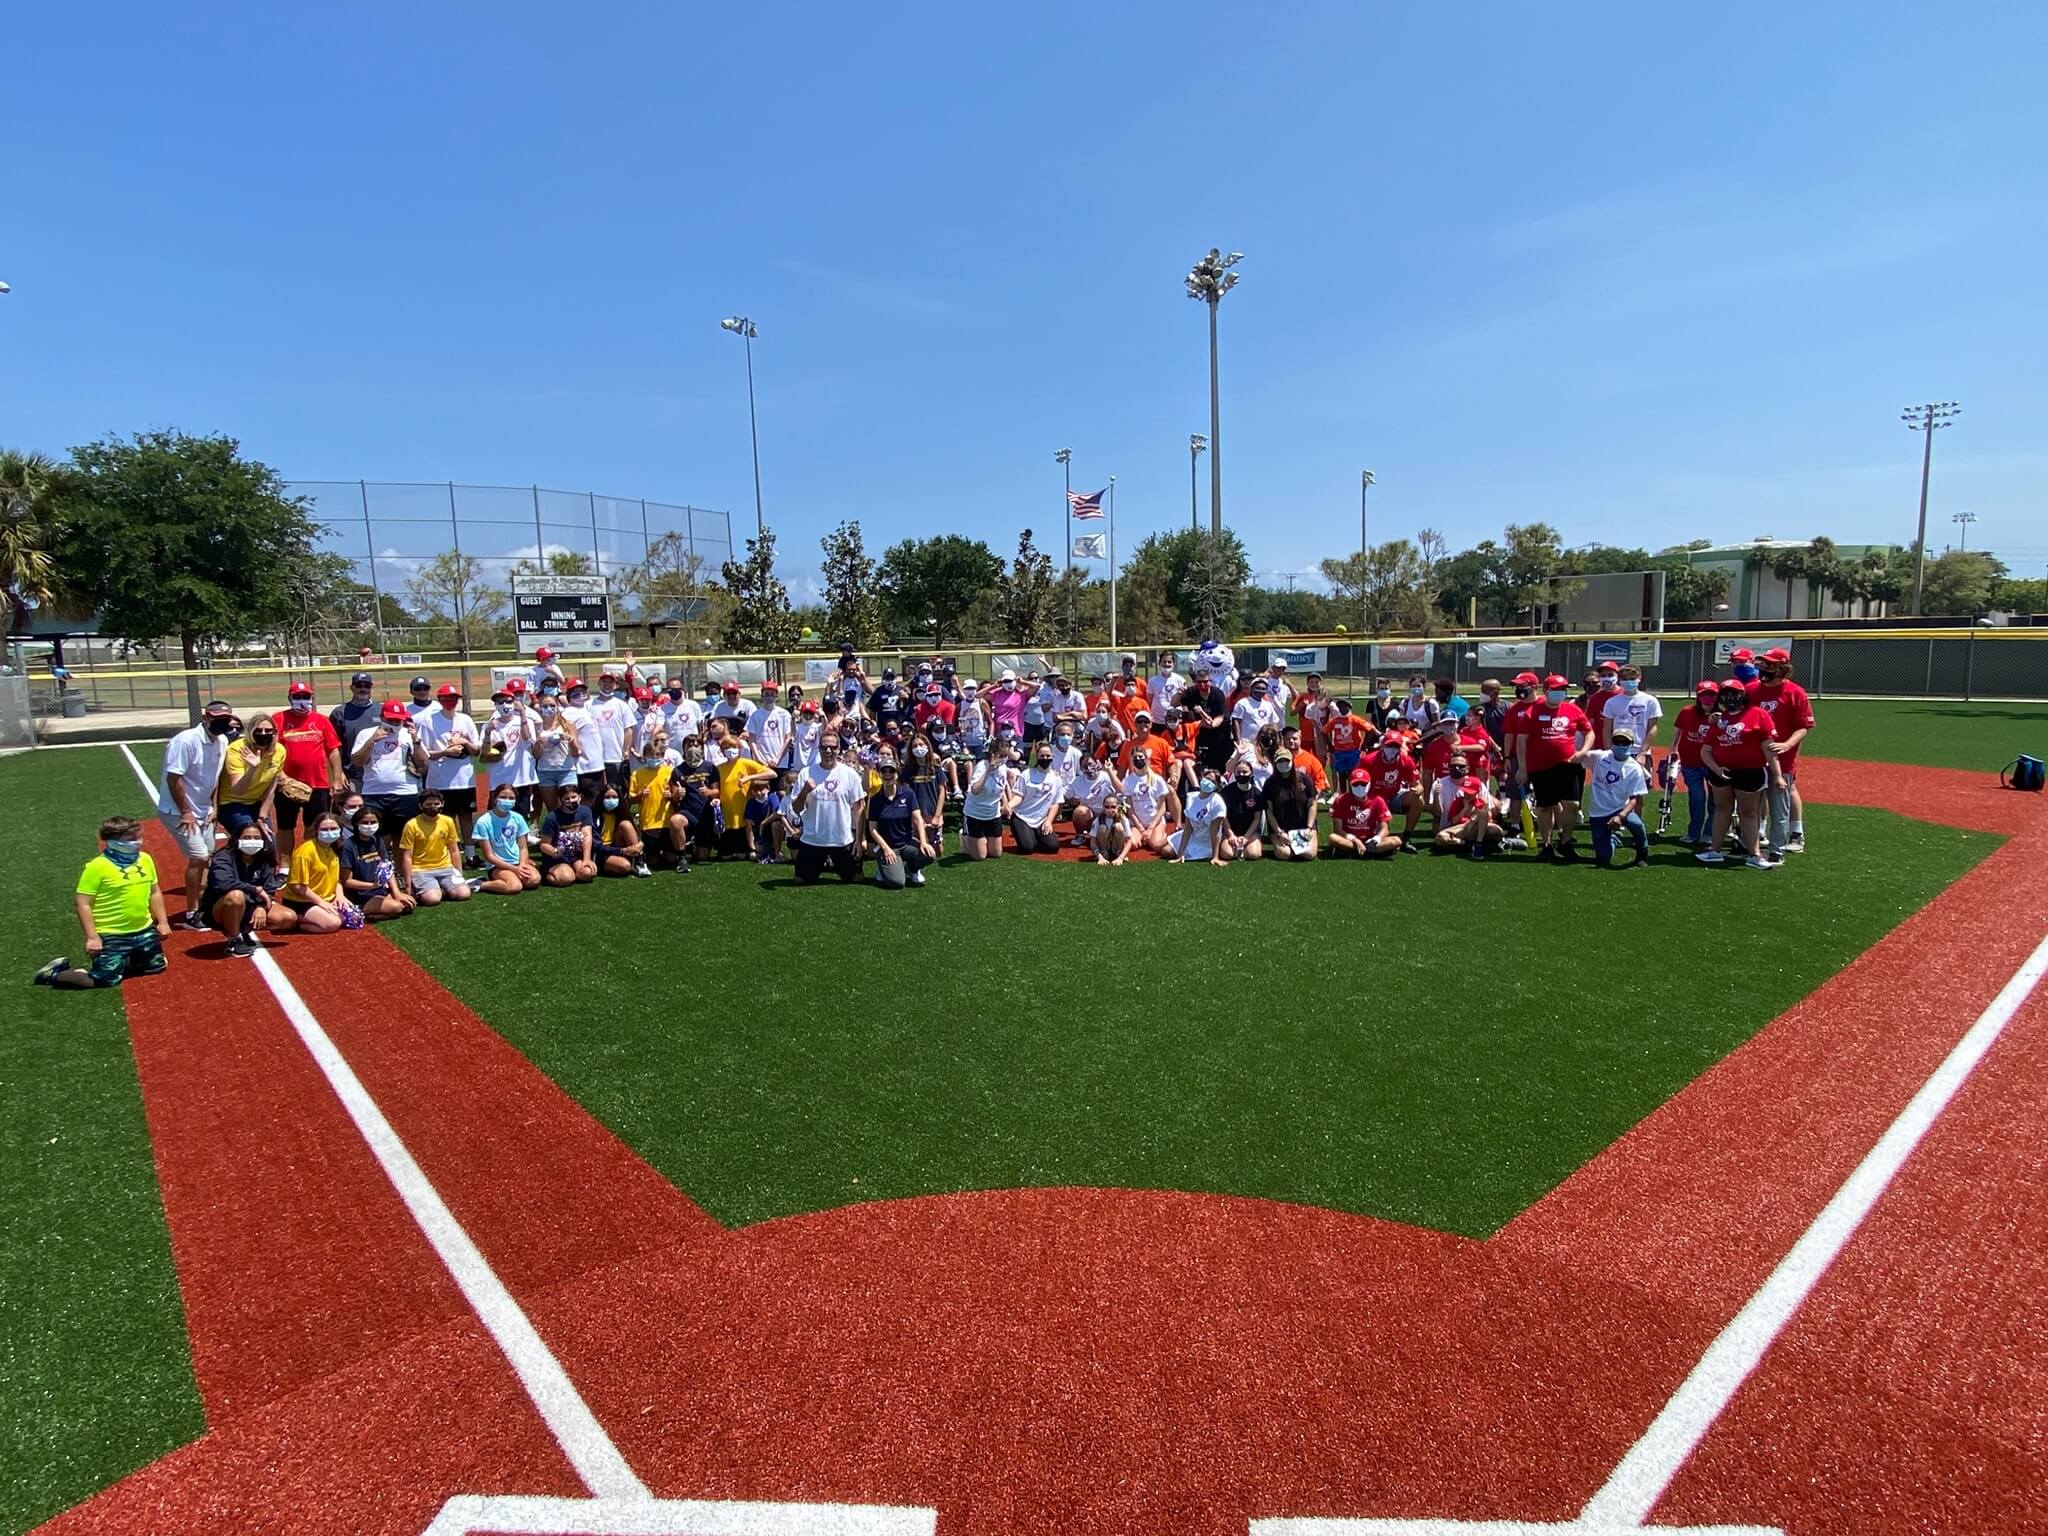 The Miracle League of Palm Beach